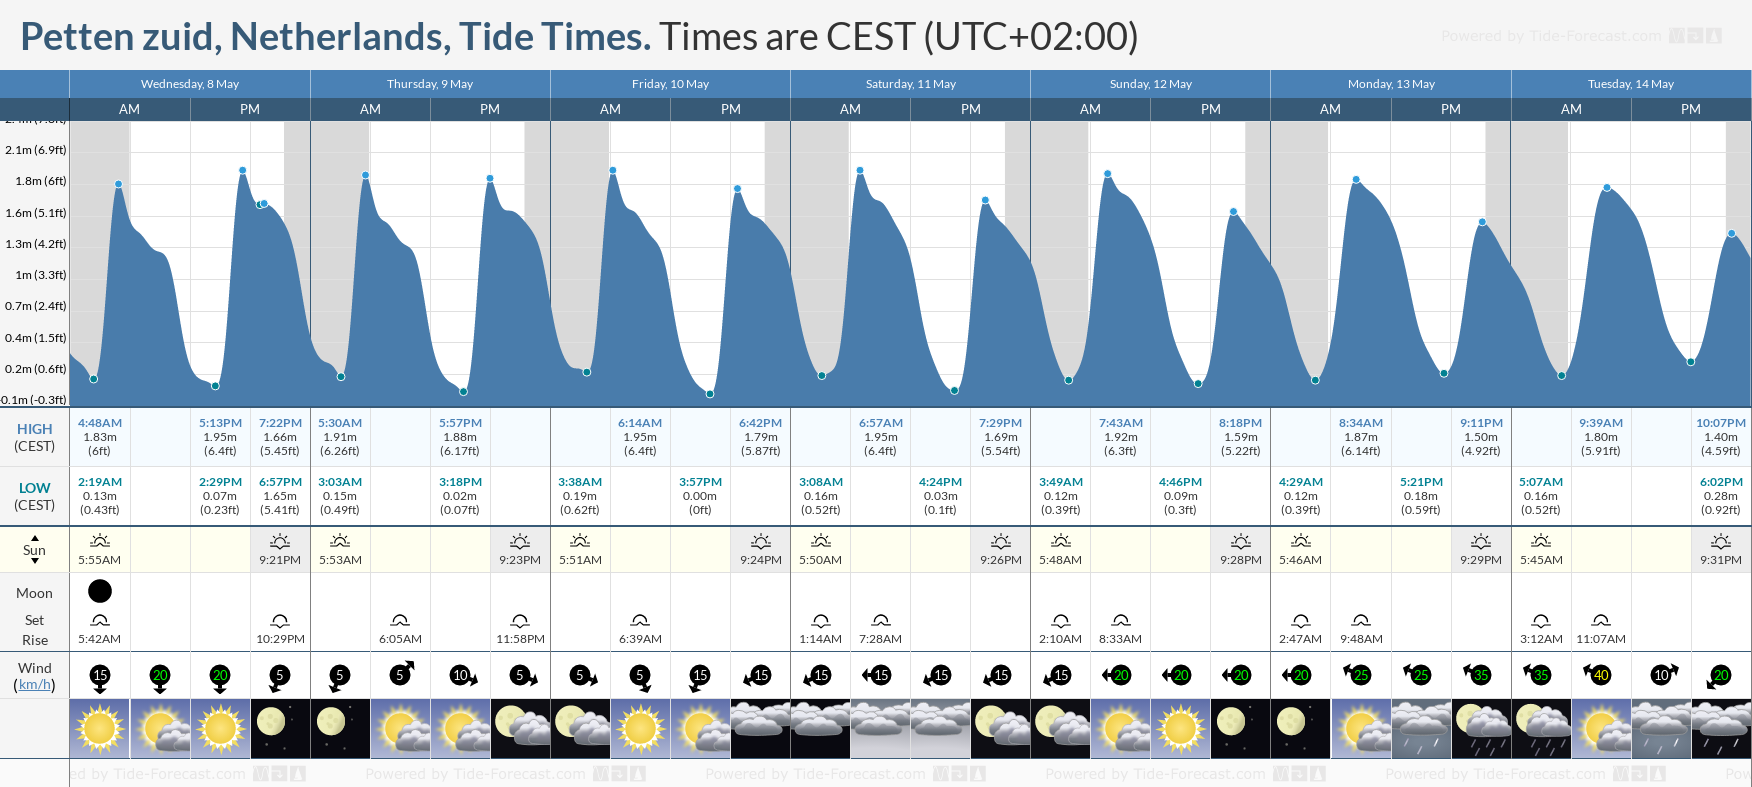 Petten zuid, Netherlands Tide Chart including high and low tide tide times for the next 7 days